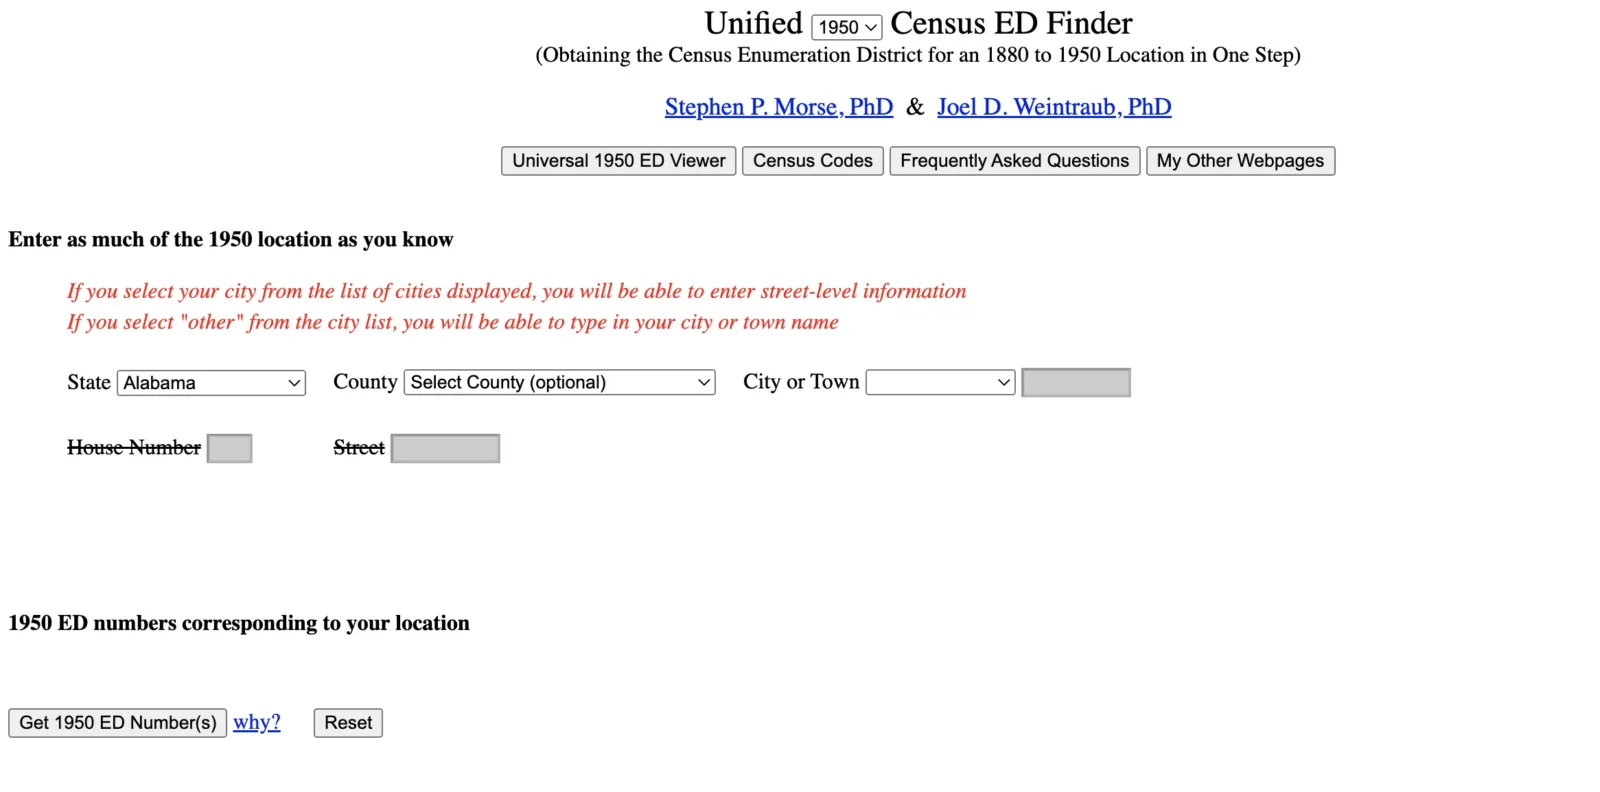 Screenshot of Steve Morse's website landing page. It prompts visitors to enter a state, county, and city or town to find the appropriate enumeration district in the 1950 census.